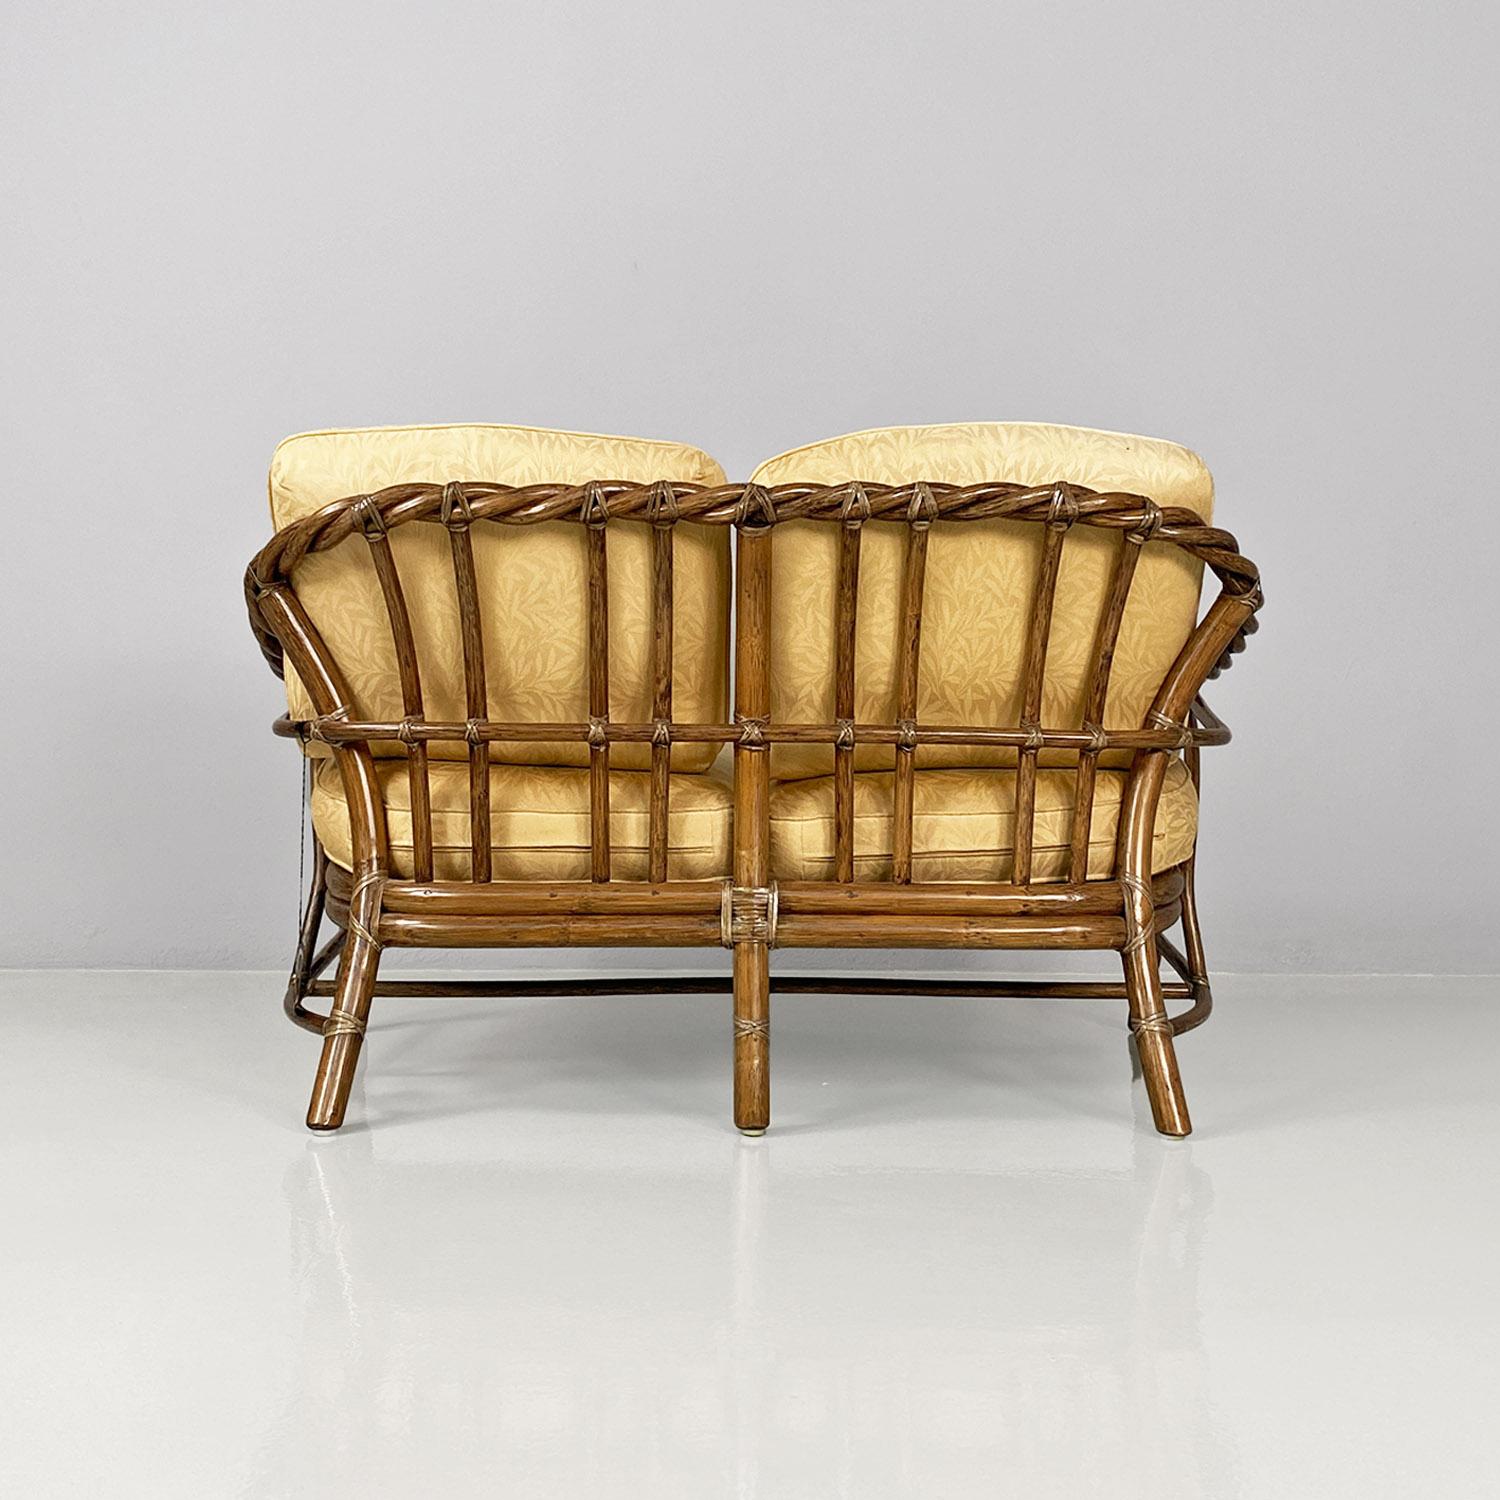 Late 20th Century American modern rattan and beige floreal fabric sofa by McGuire Company, 1970s For Sale